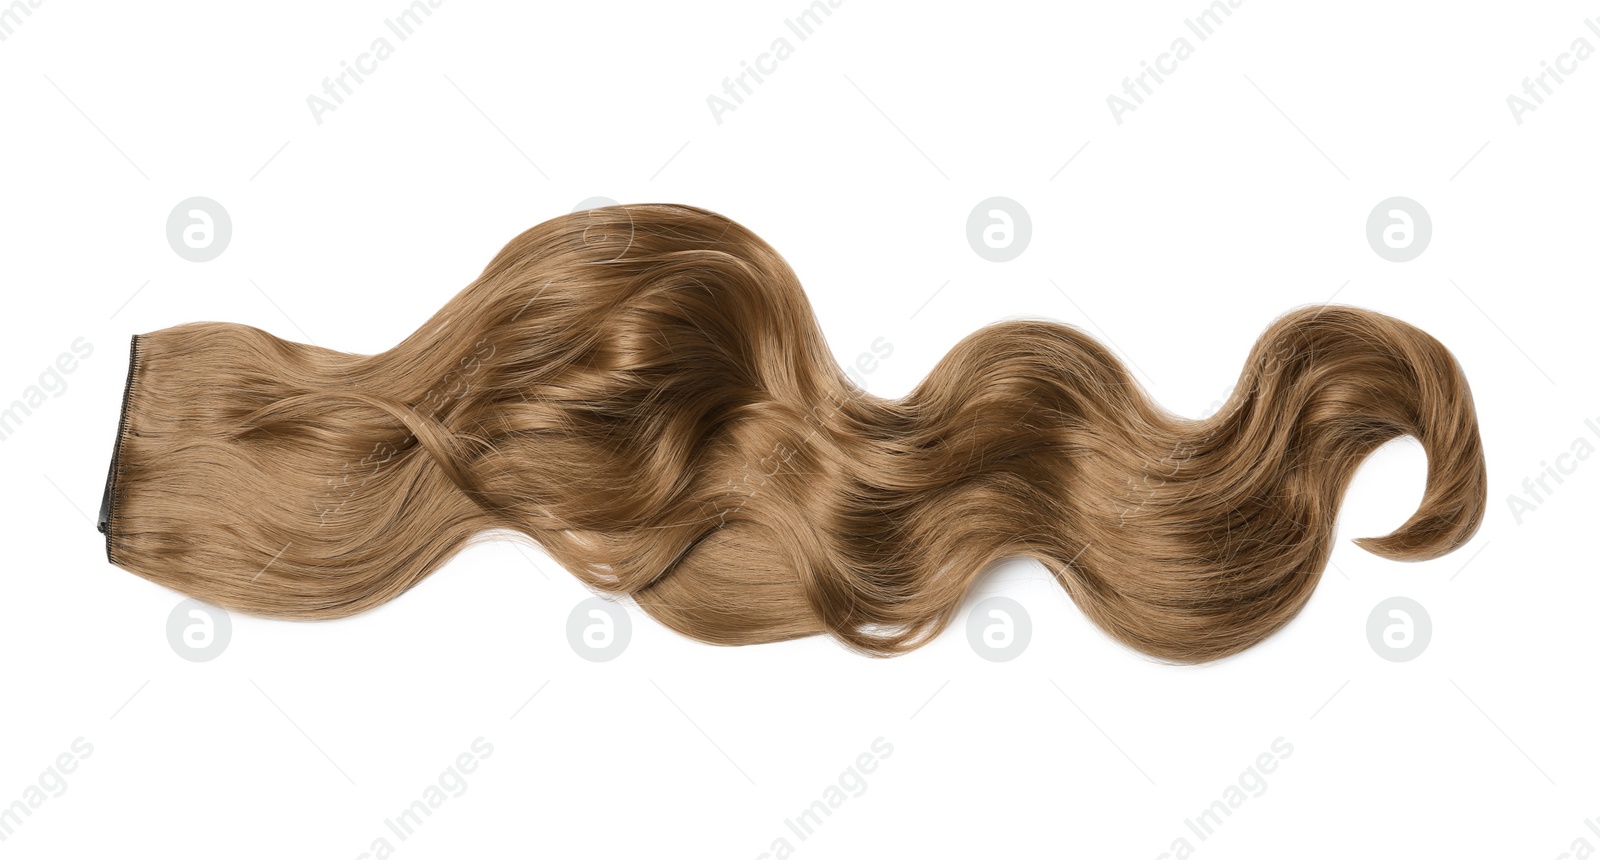 Photo of Lock of brown wavy hair on white background, top view